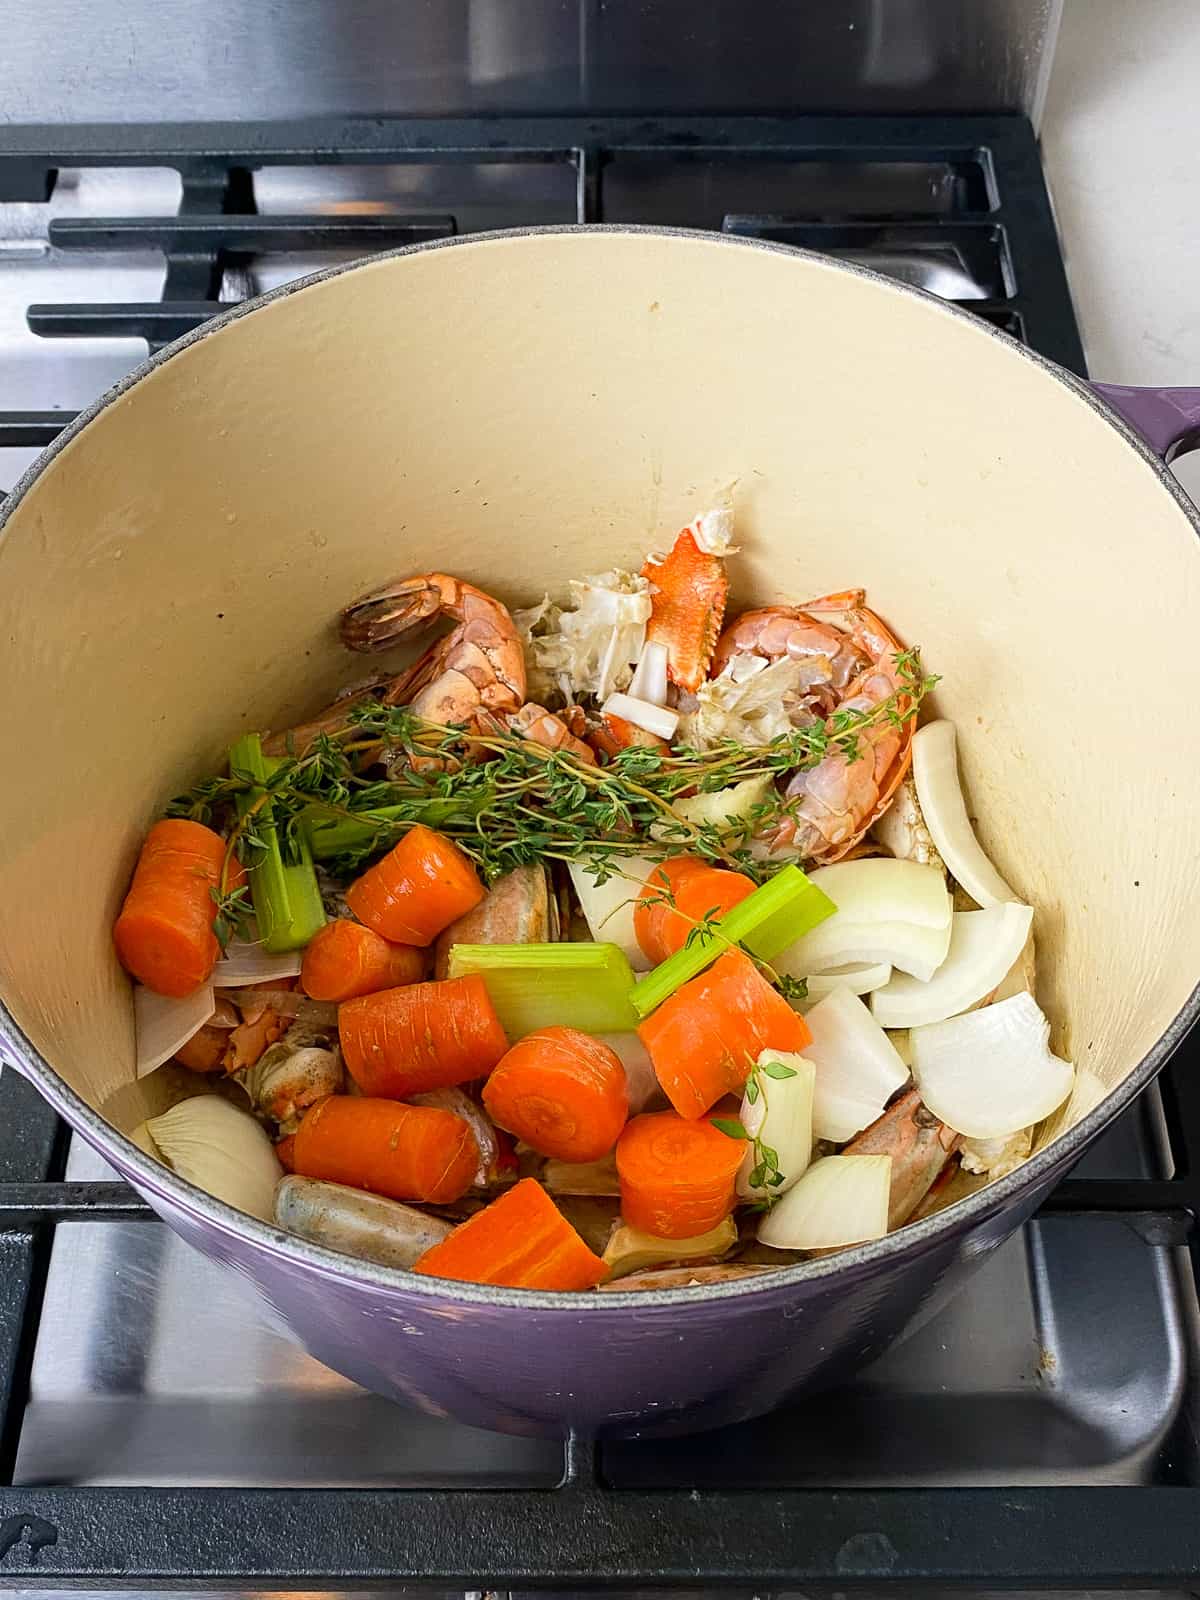 Add the aromatics, including the herbs, carrots, onion and celery.